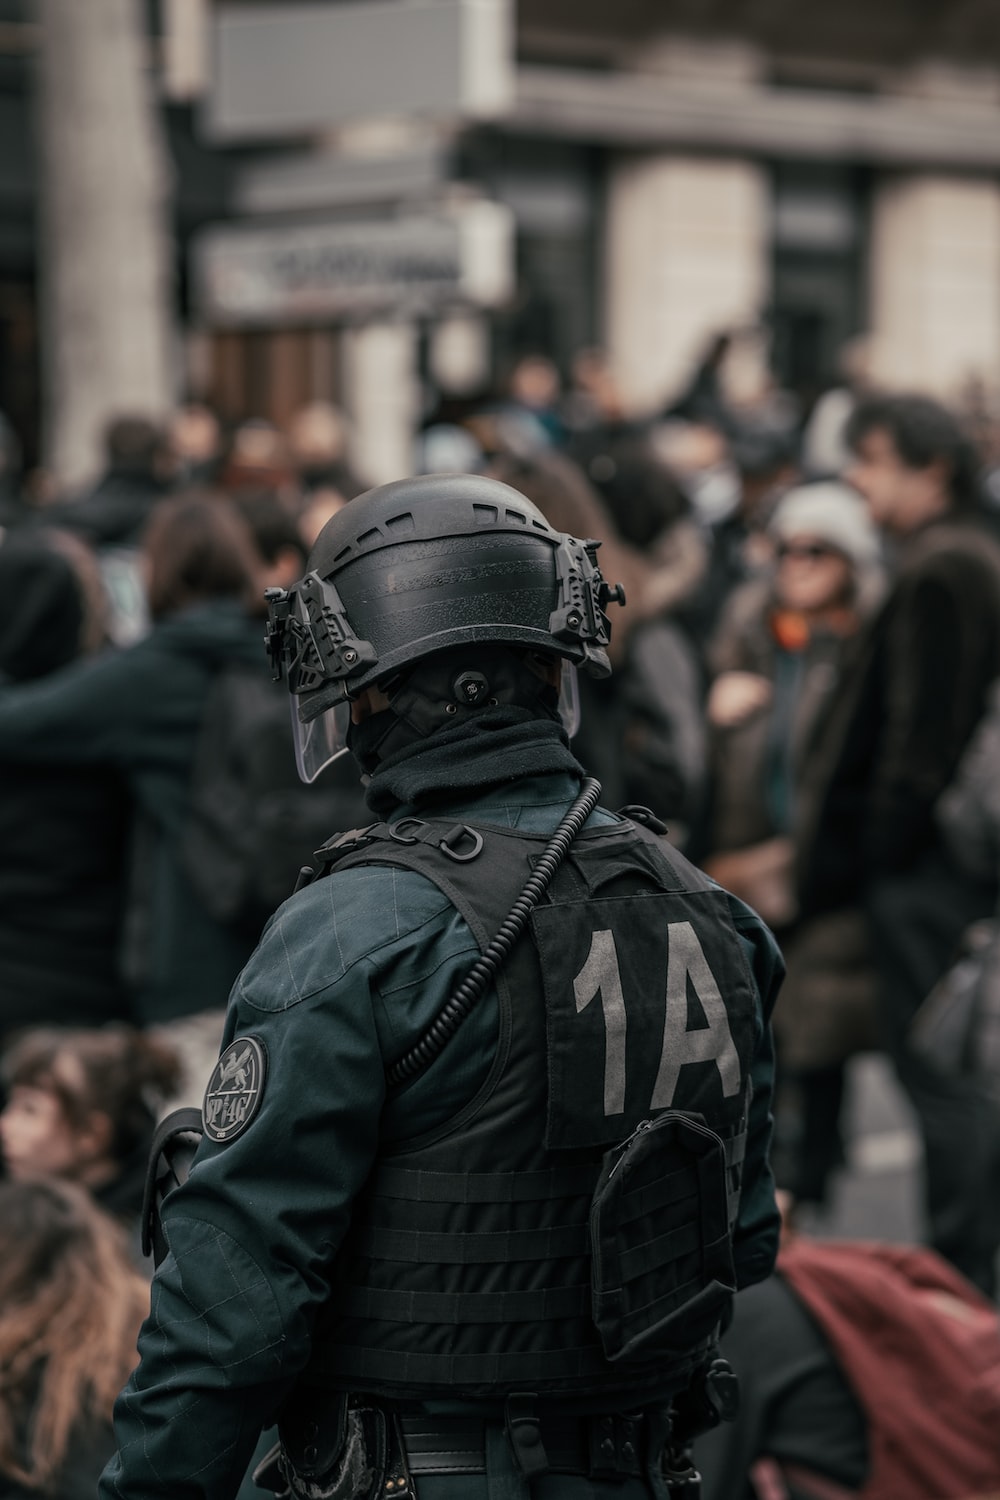 Riot Police Picture. Download Free Image